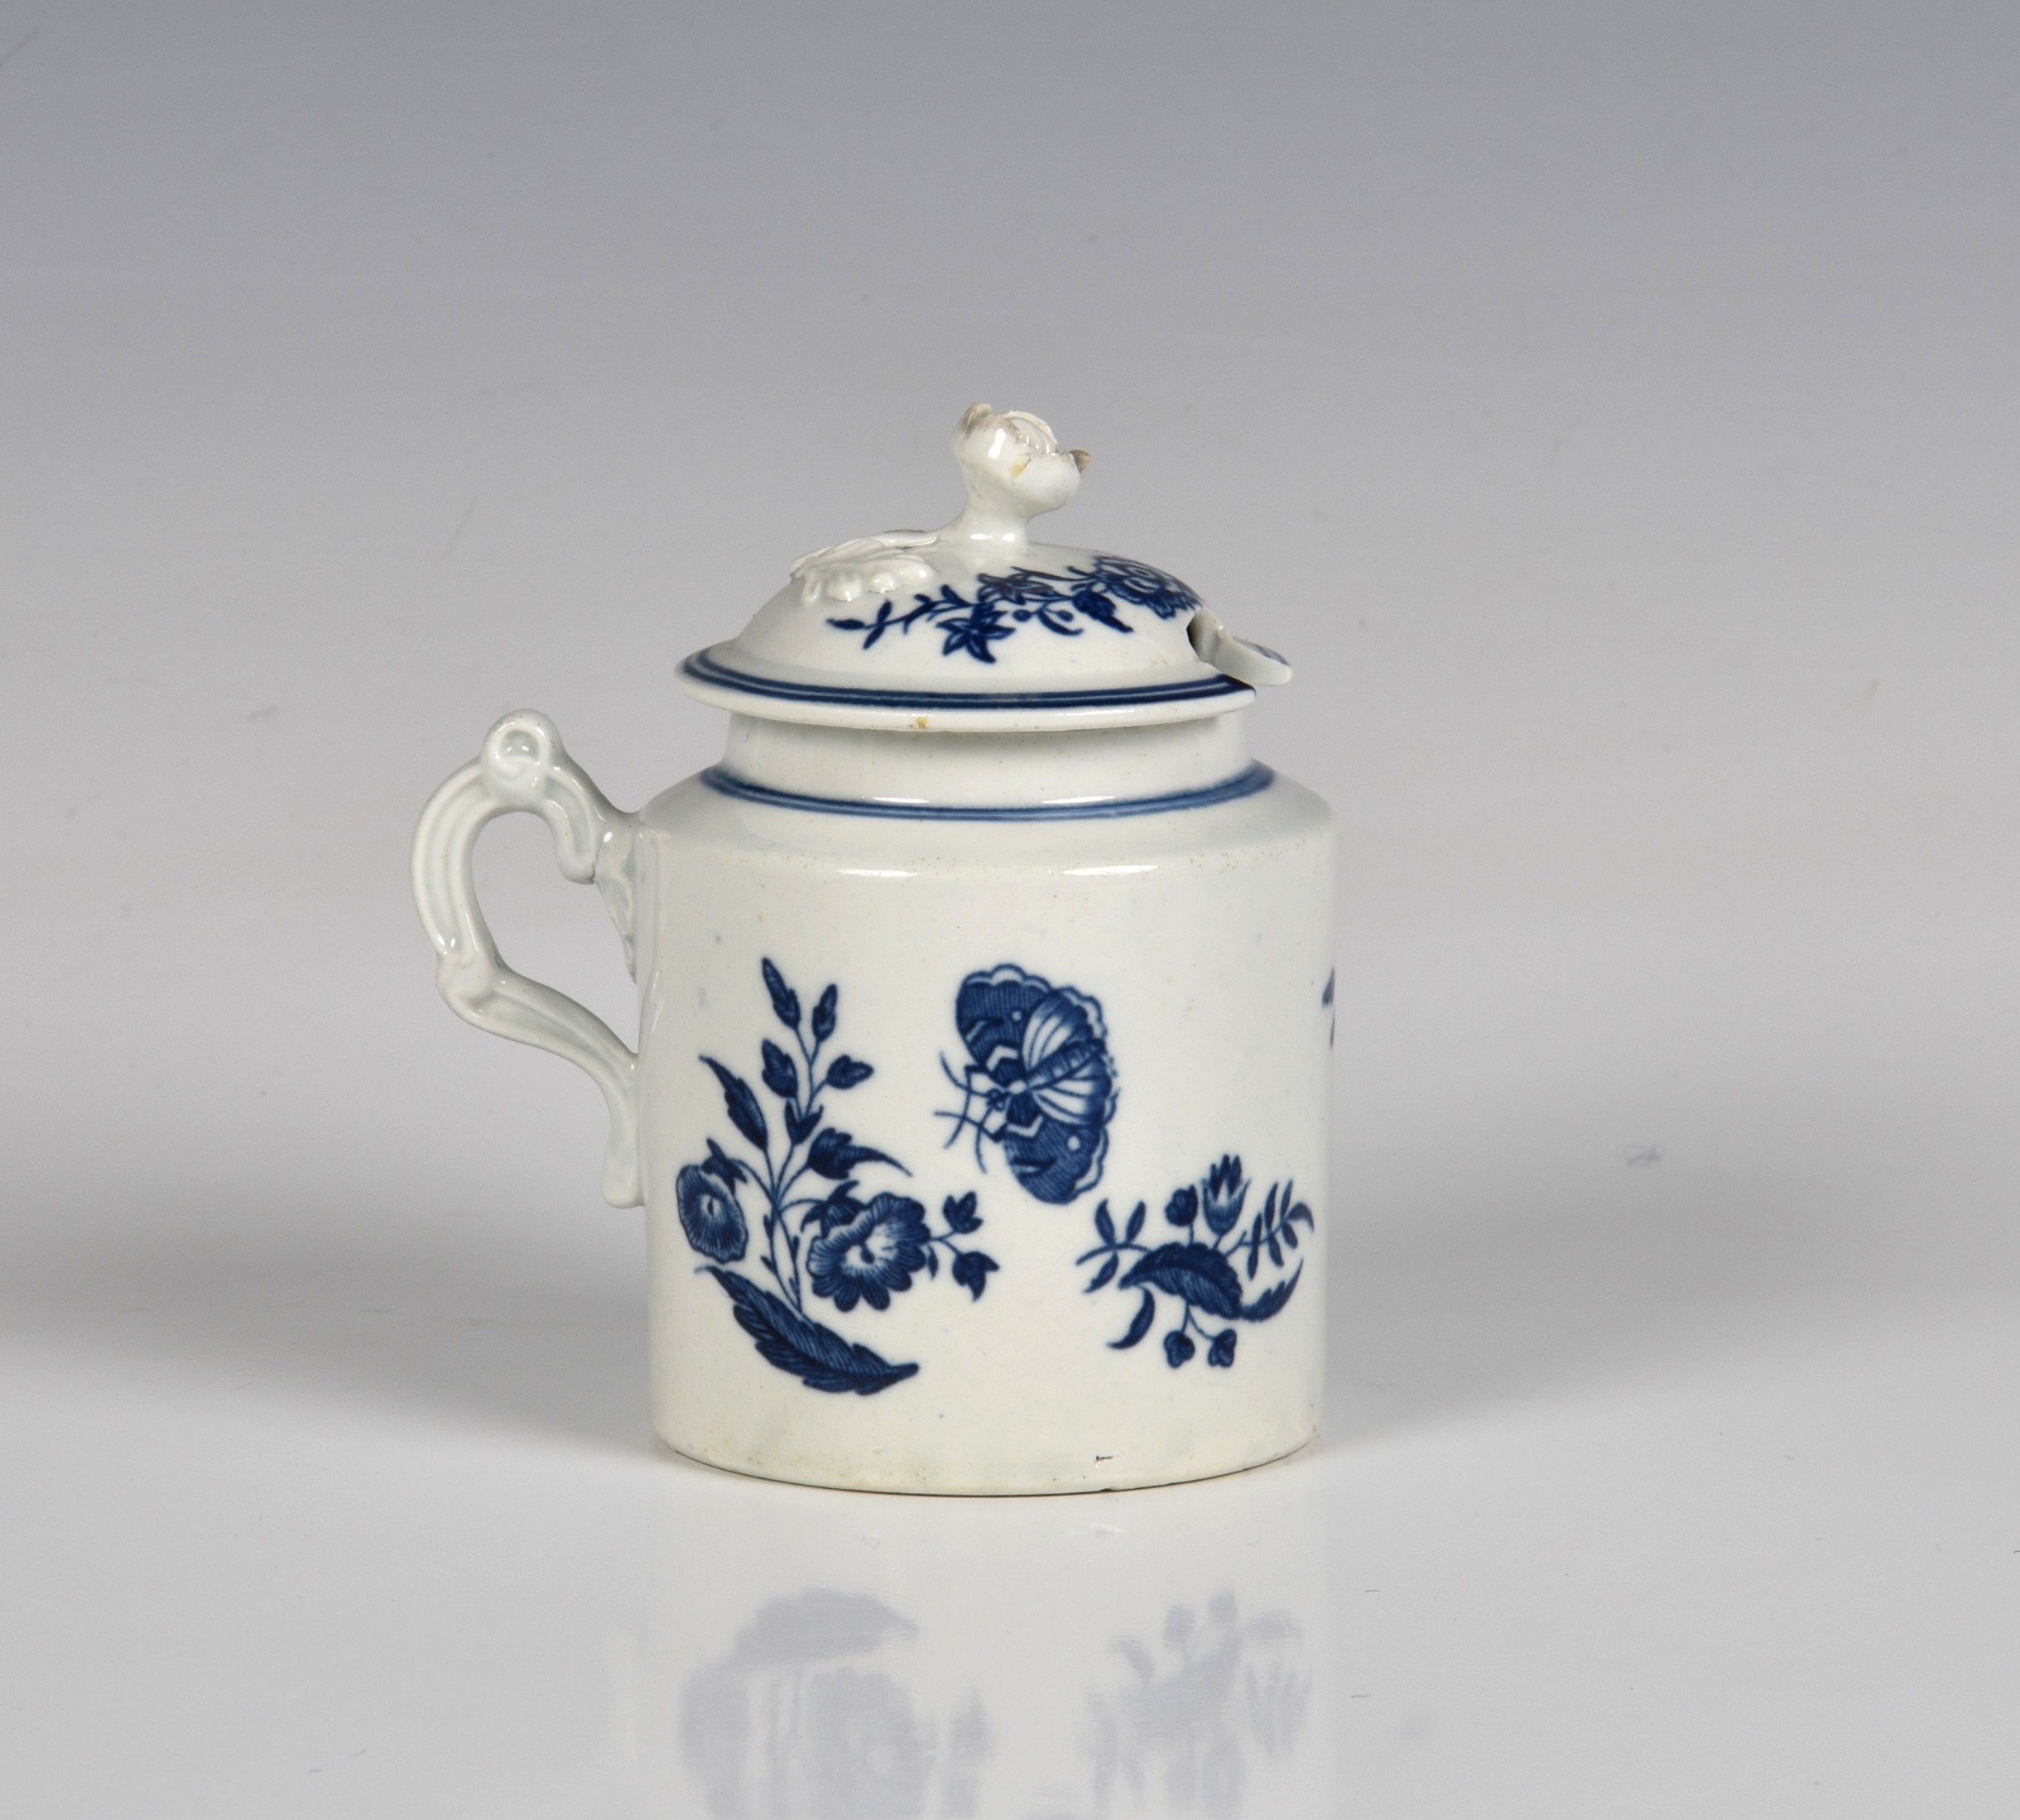 A first period Worcester porcelain mustard pot and cover